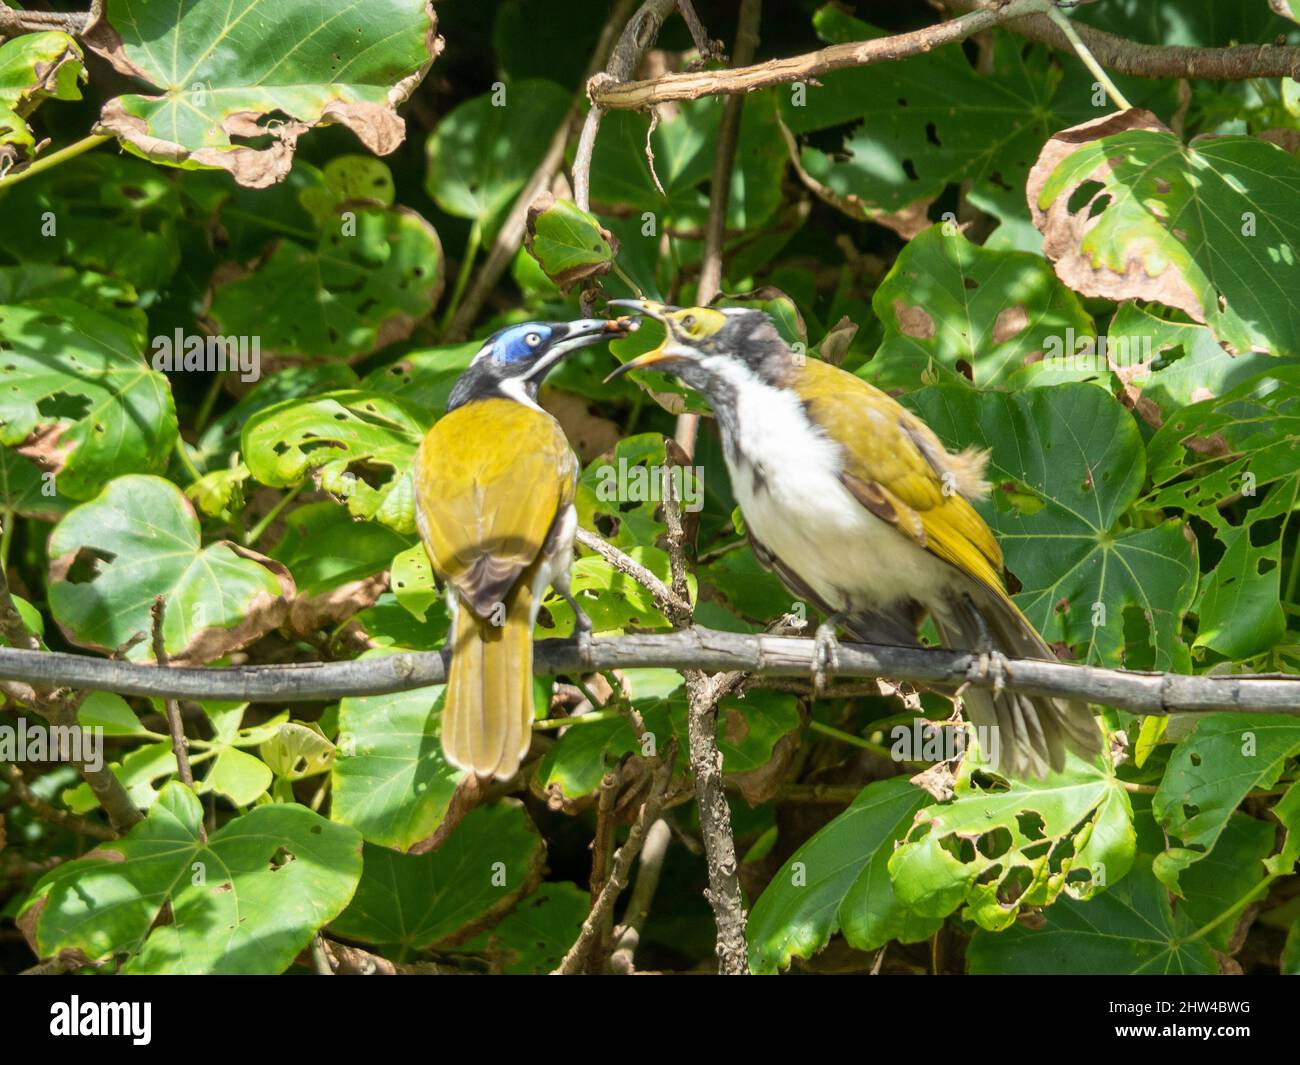 Birds eating, Blue-Faced Honeyeater or Banana Bird feeding its rather large and demanding fledgling on a branch of green coastal tree, Australia Stock Photo